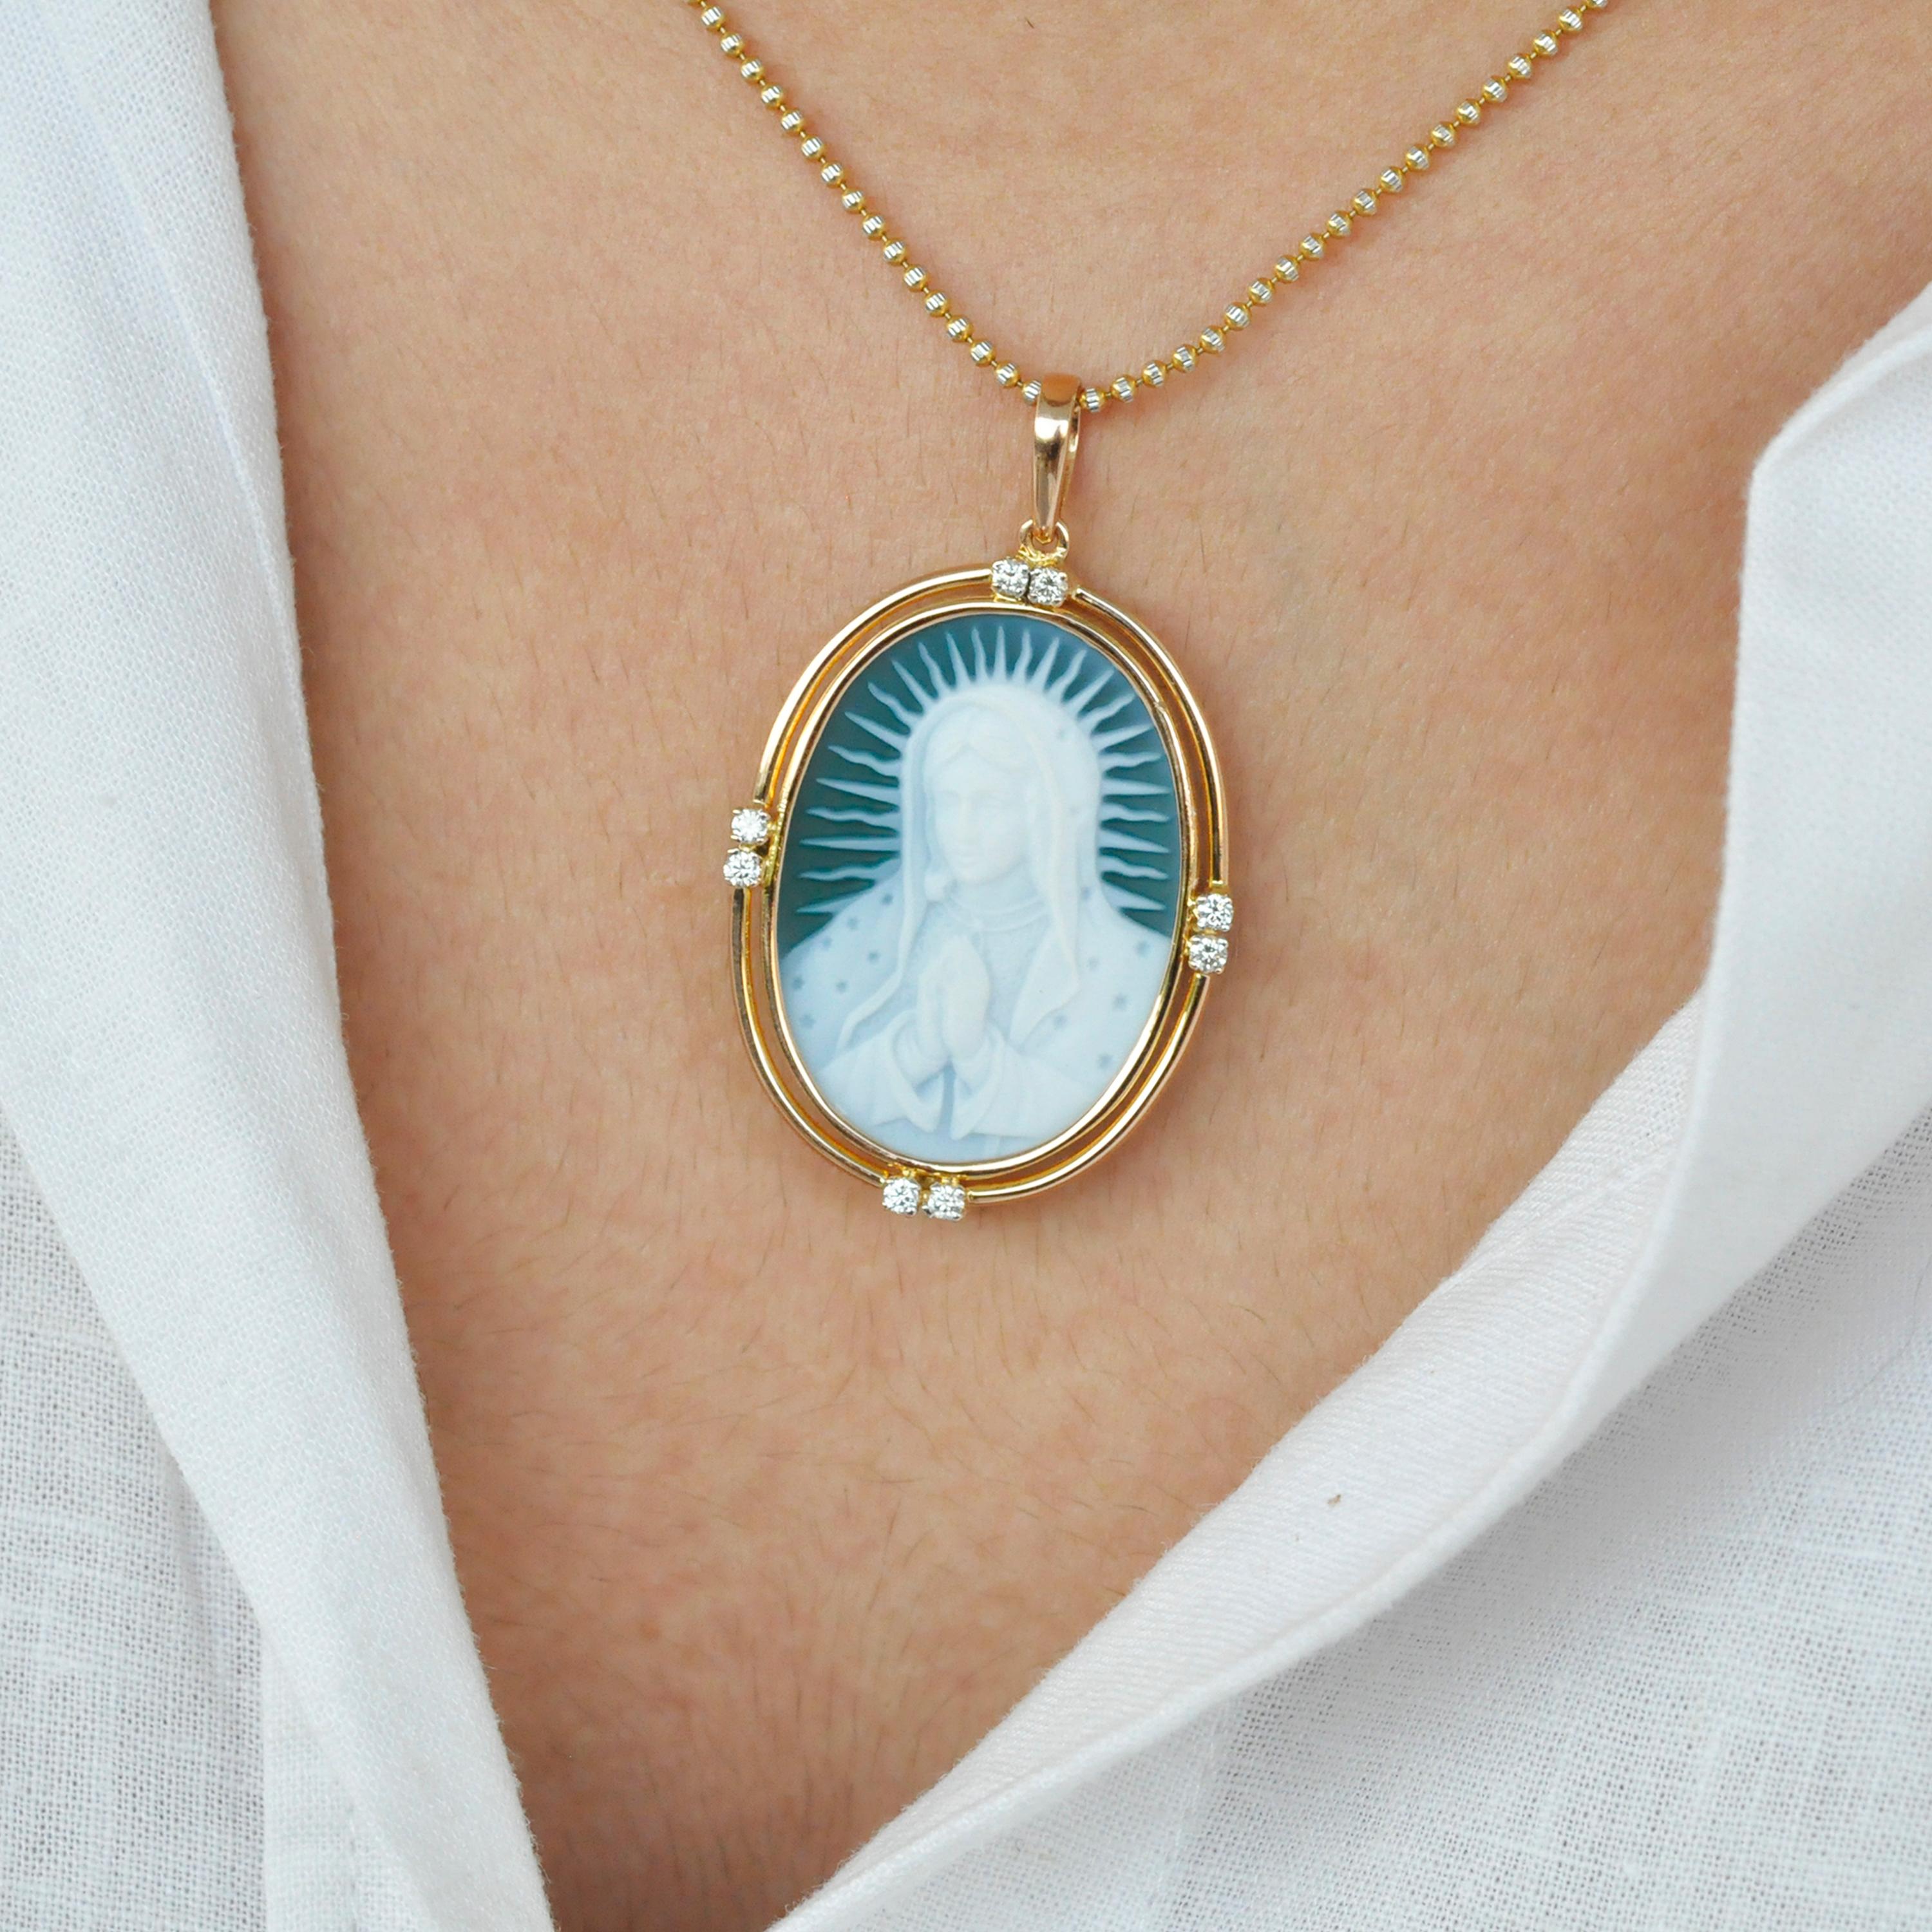 Oval Cut 18 Karat Gold Mother Mary Agate Carving Cameo Diamond Pendant Necklace For Sale